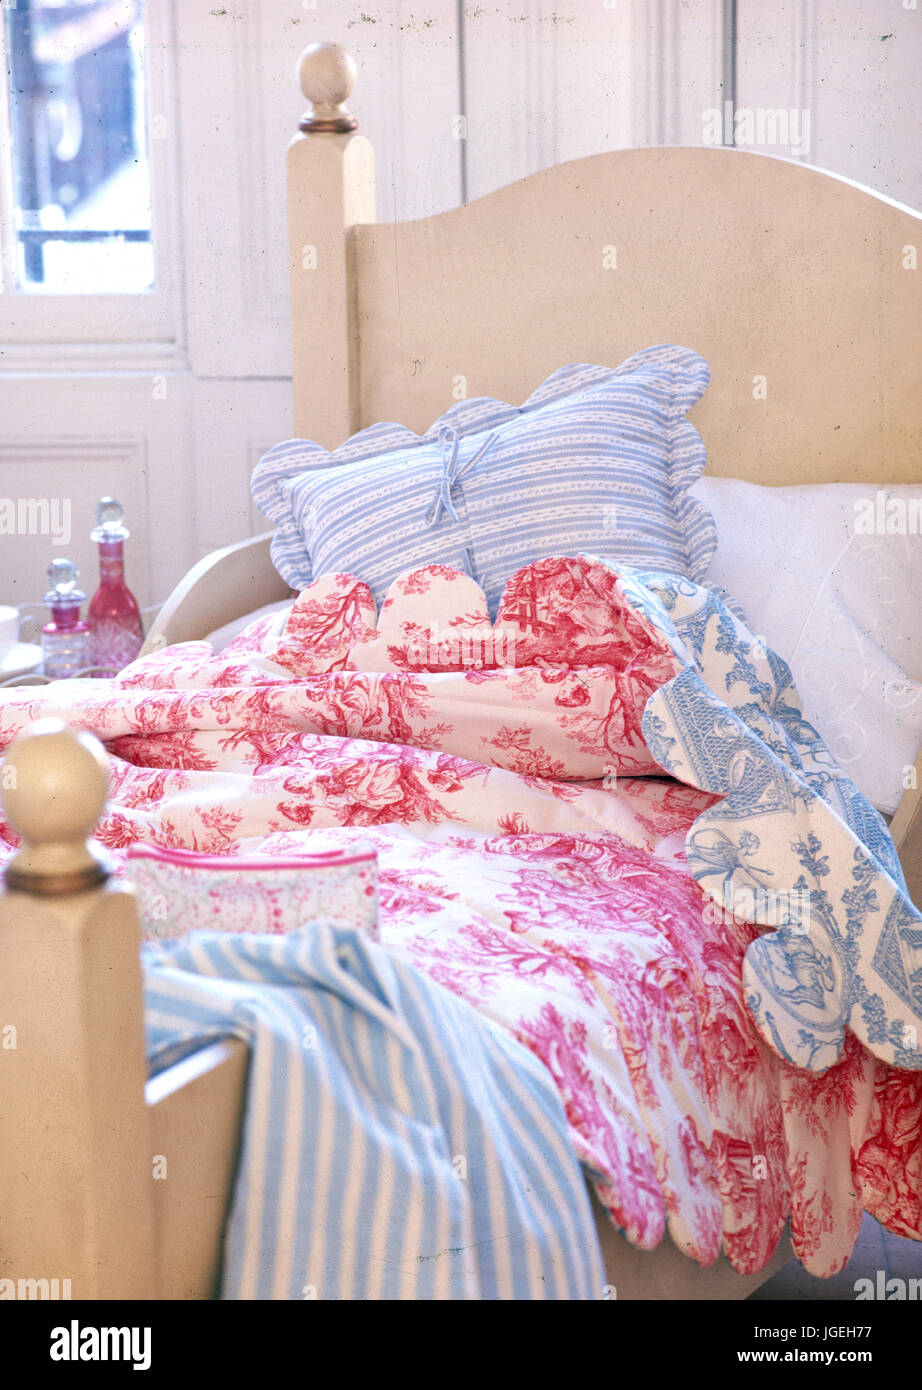 Single bed with Toile de Jouy quilt and striped pillows Stock Photo